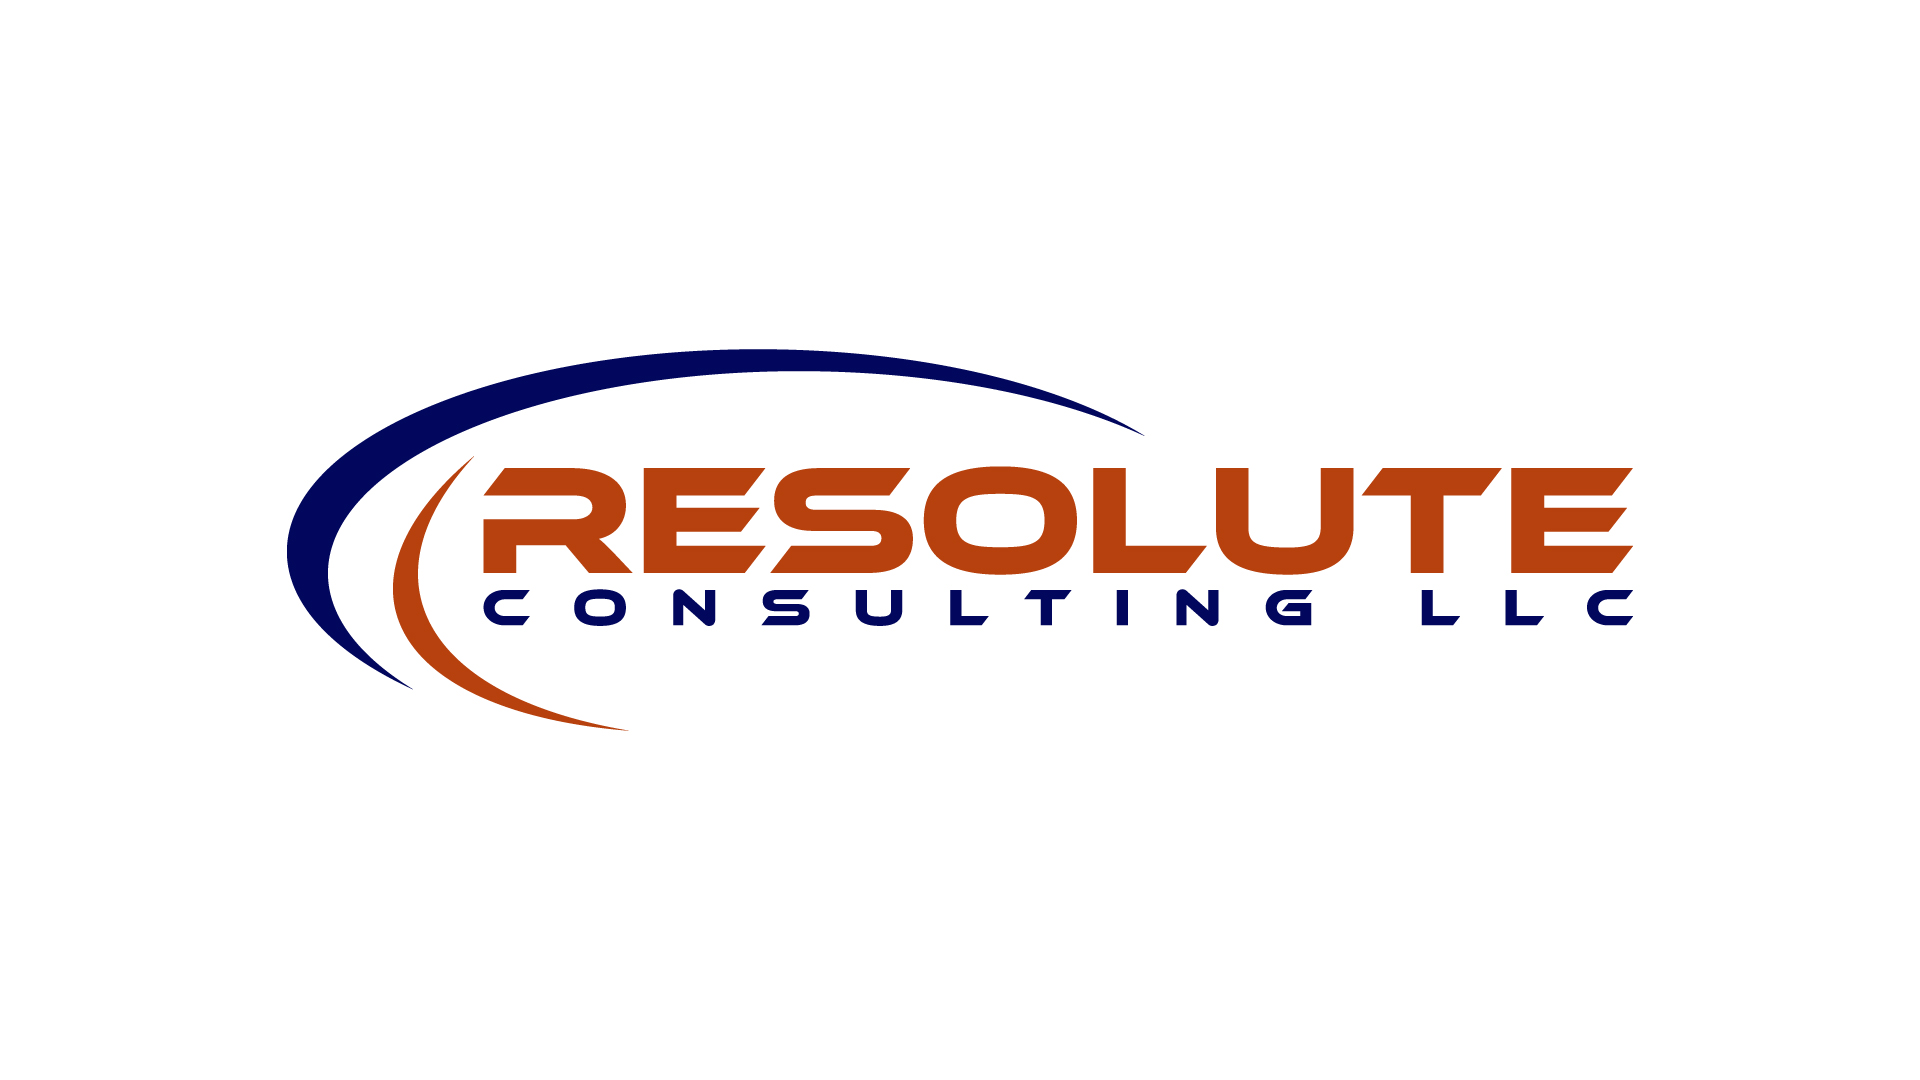 Resolute Consulting, LLC